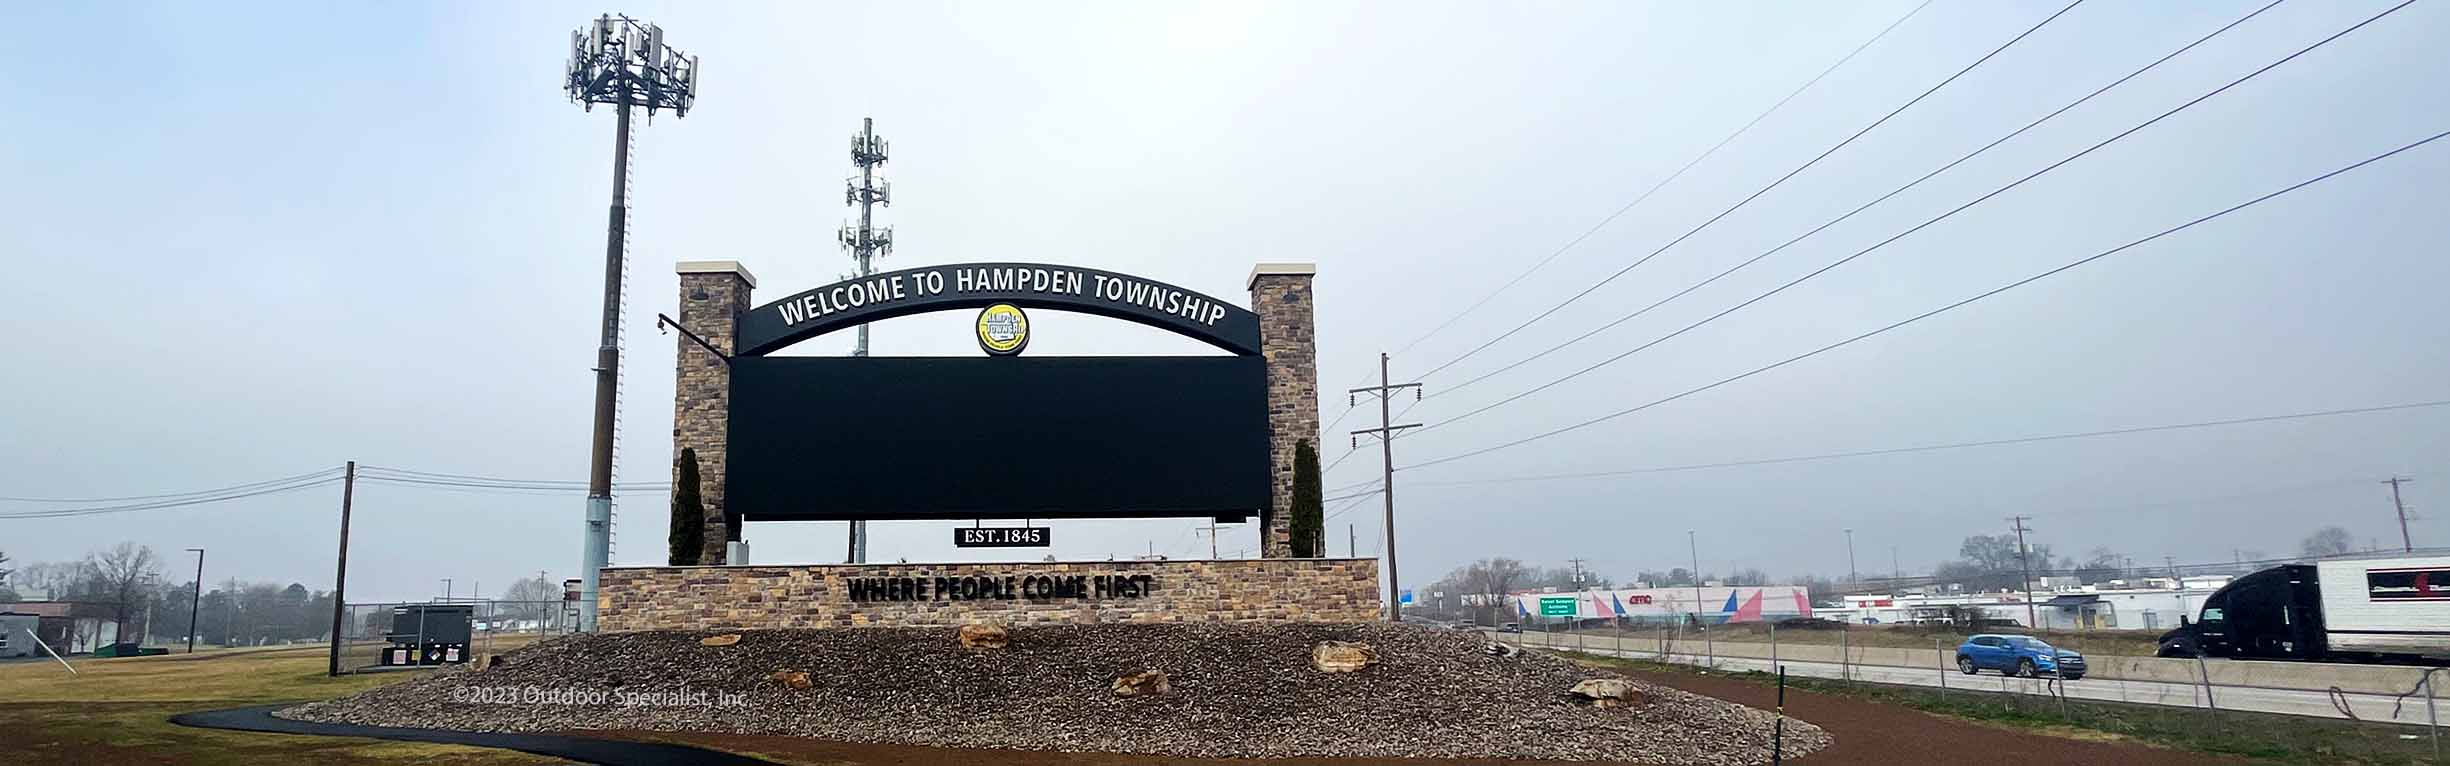 banner Hampden Township, Cumberland County, PA new welcome sign HWY 581